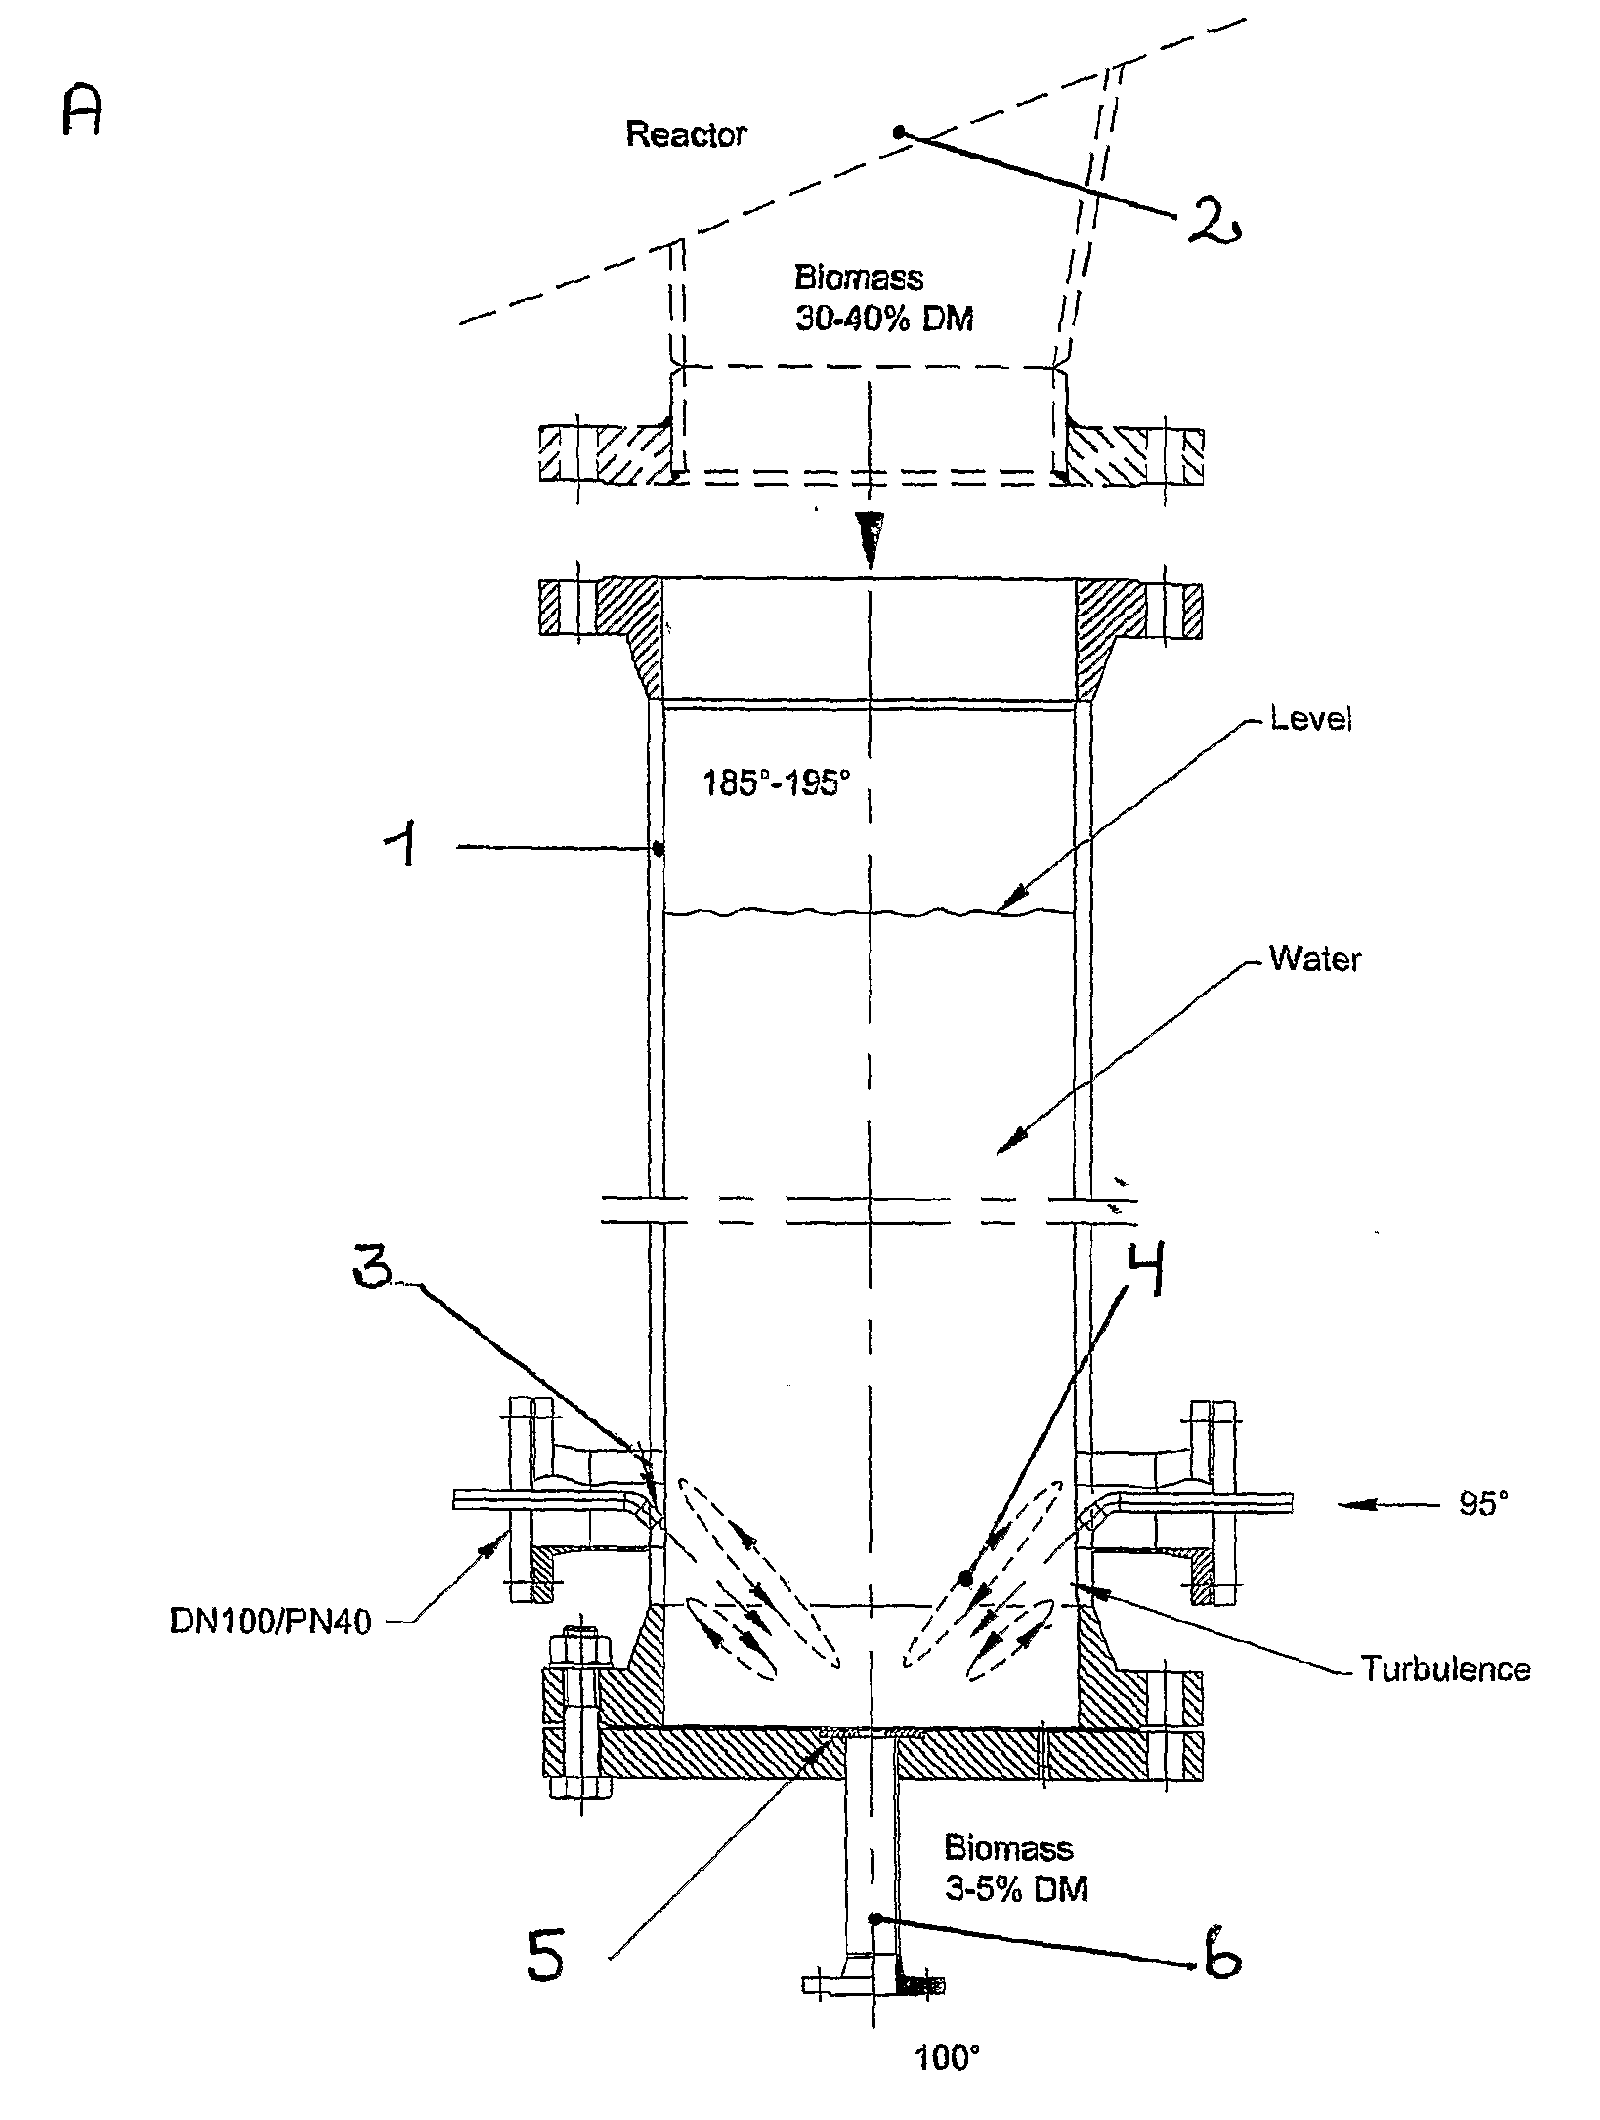 Device and methods for discharging pretreated biomass from higher to lower pressure regions